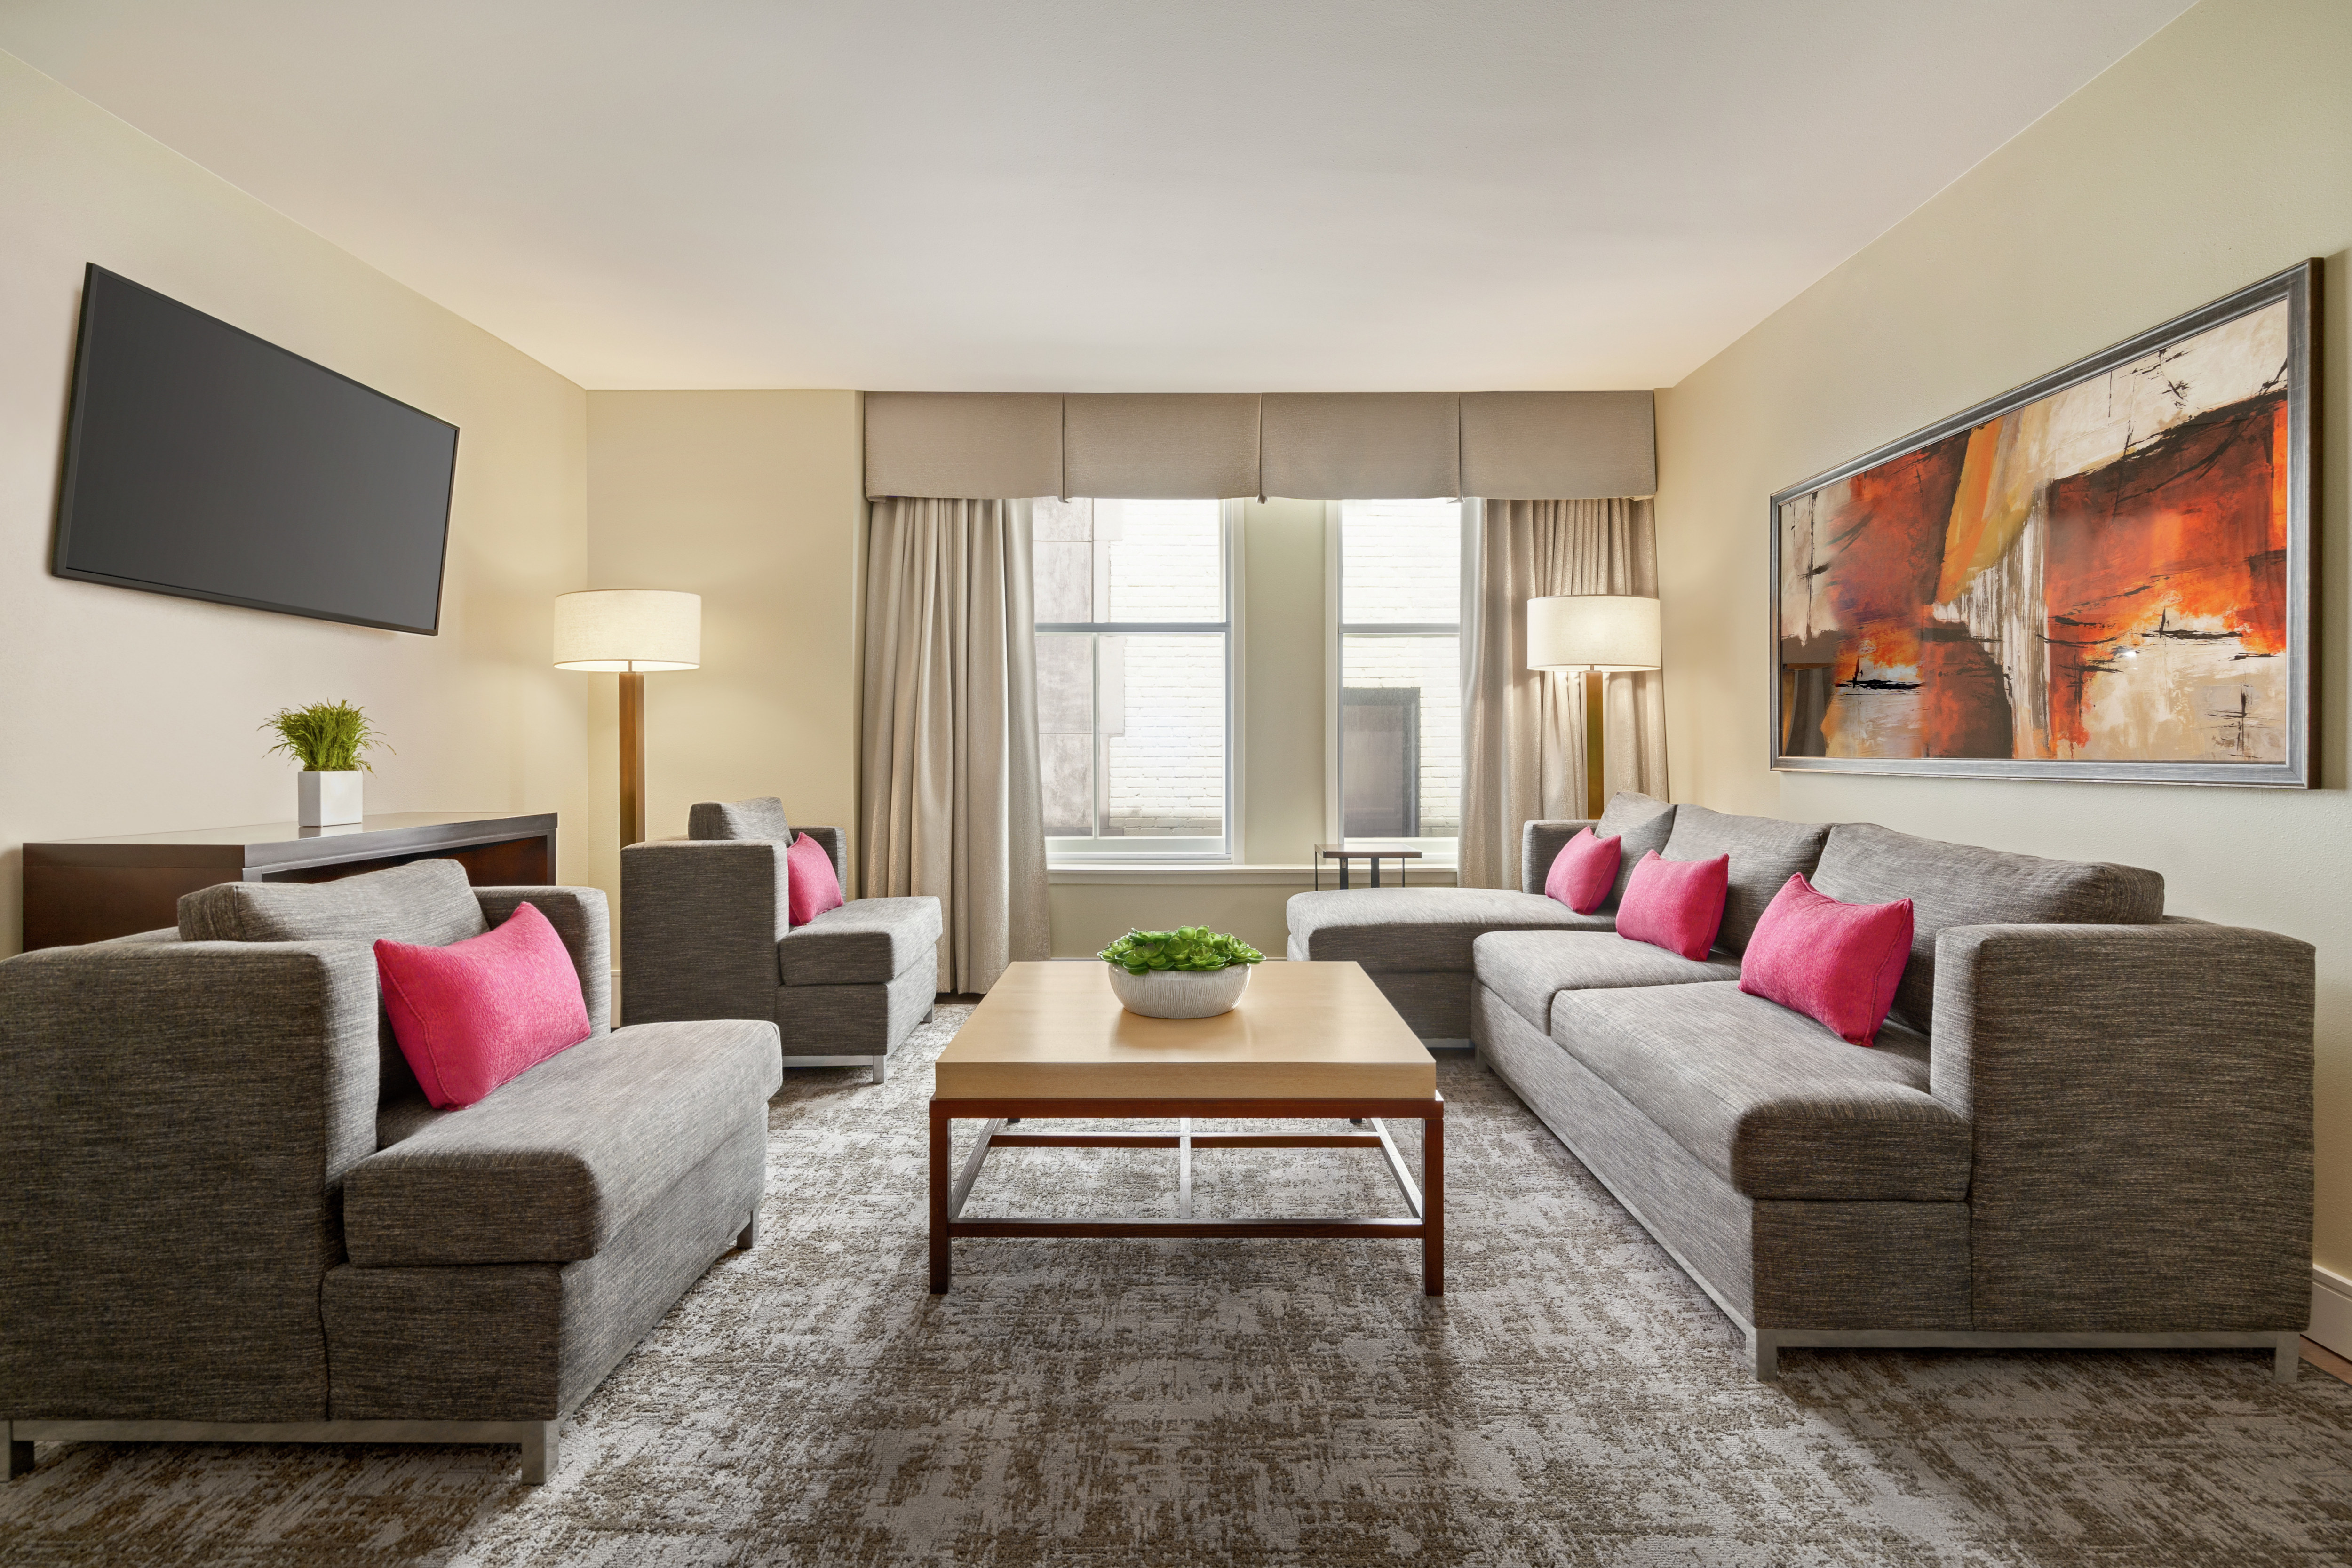 Bright living area in suite featuring comfortable seating, TV, and beautiful outdoor view.